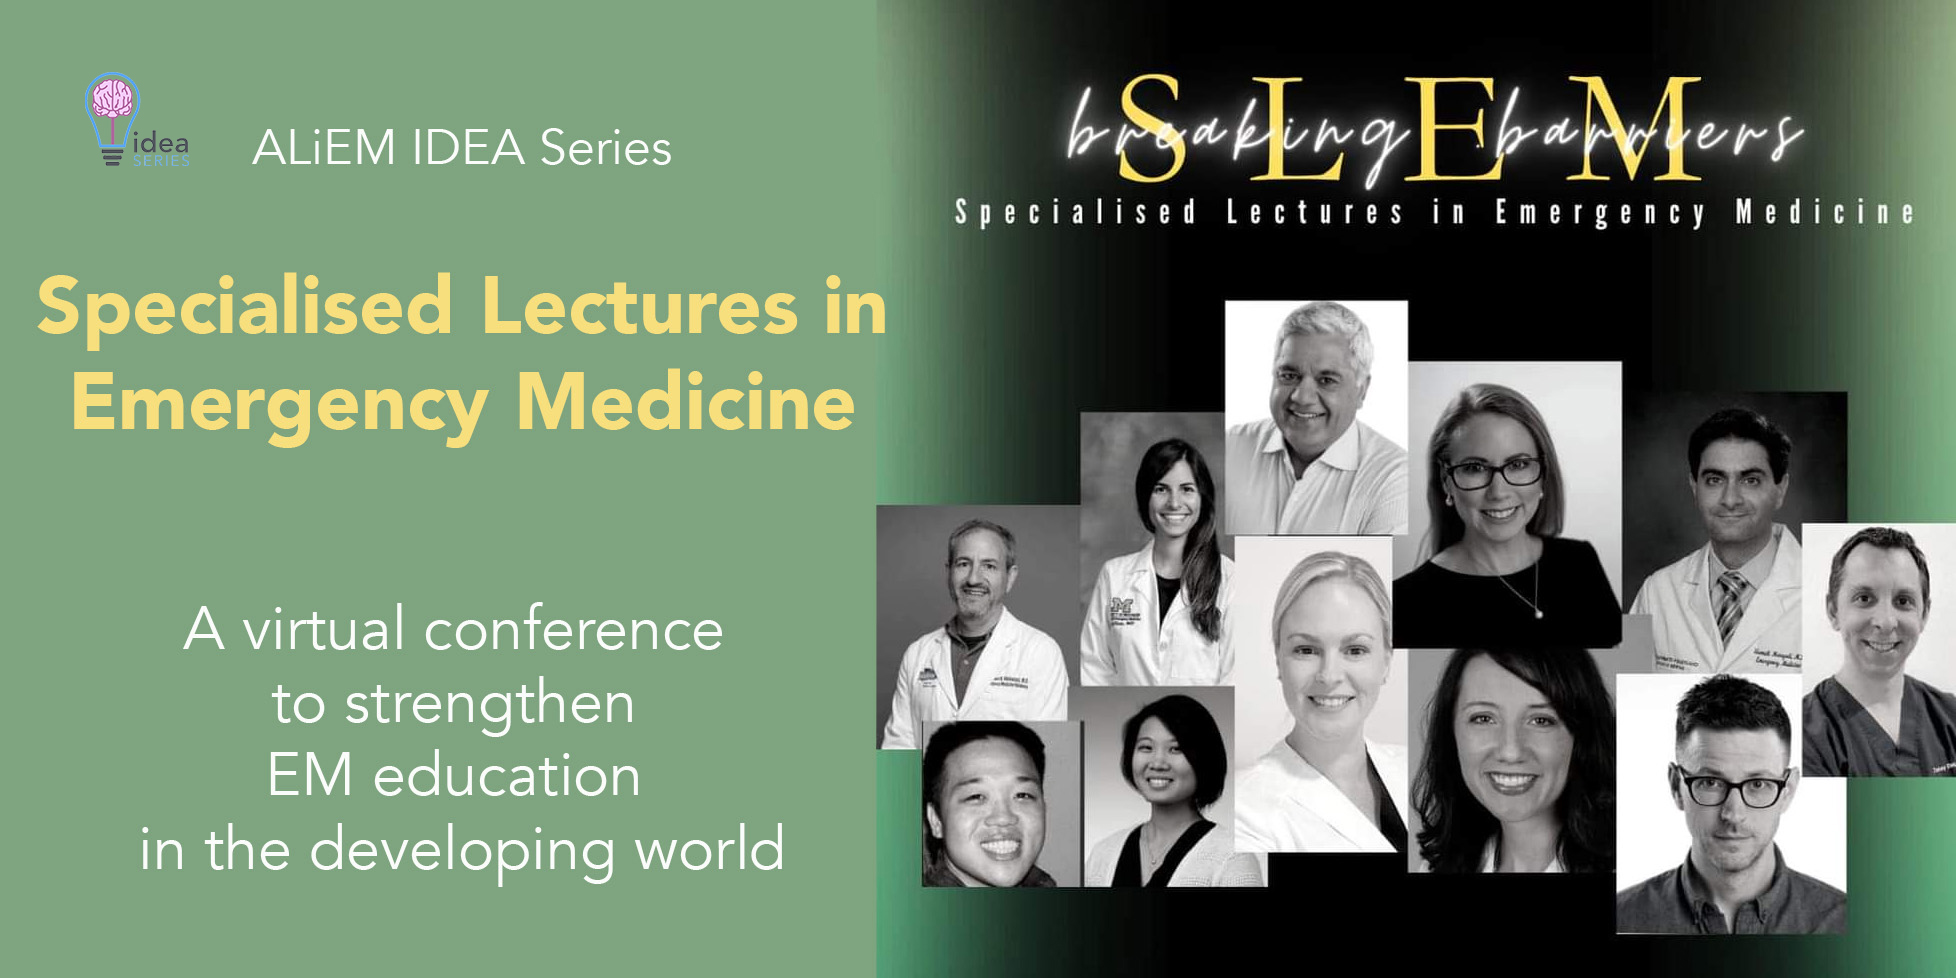 Specialised lectures in emergency medicine, virtual conference, developing world